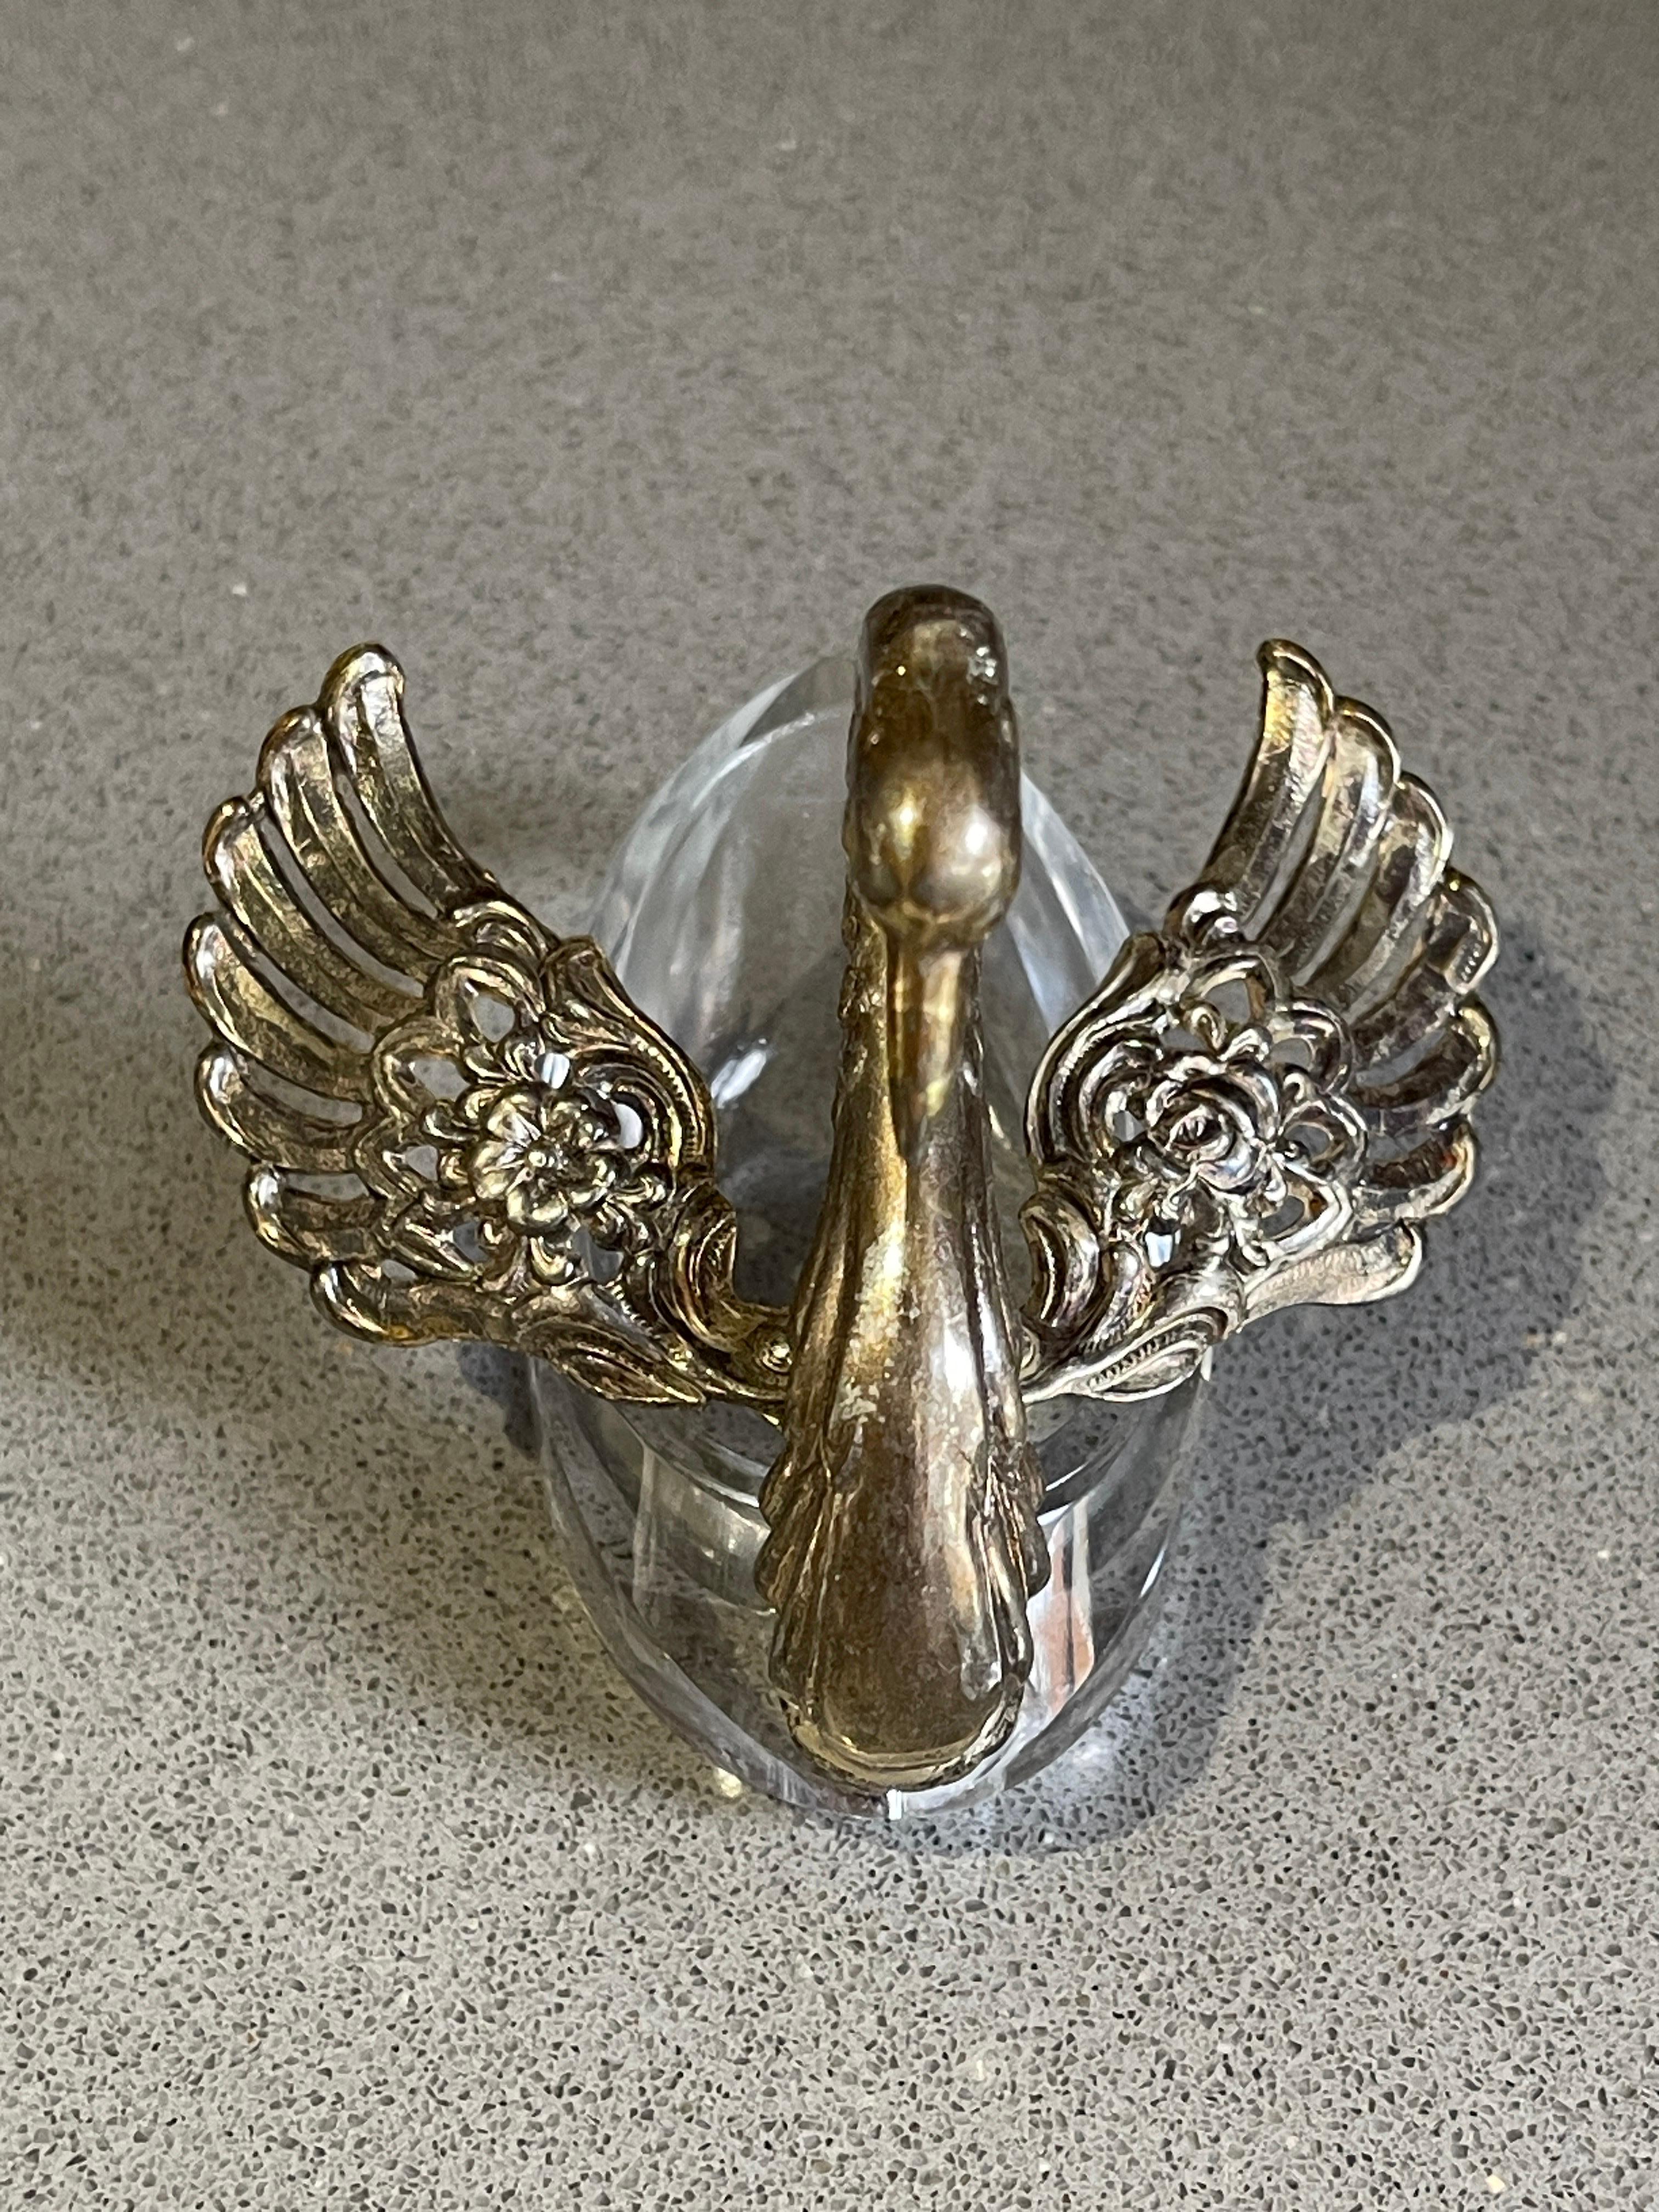 Silvered Silver Salt Shaker, A Pair of Antique Salt Shaker Crystal Swann Moving Wings